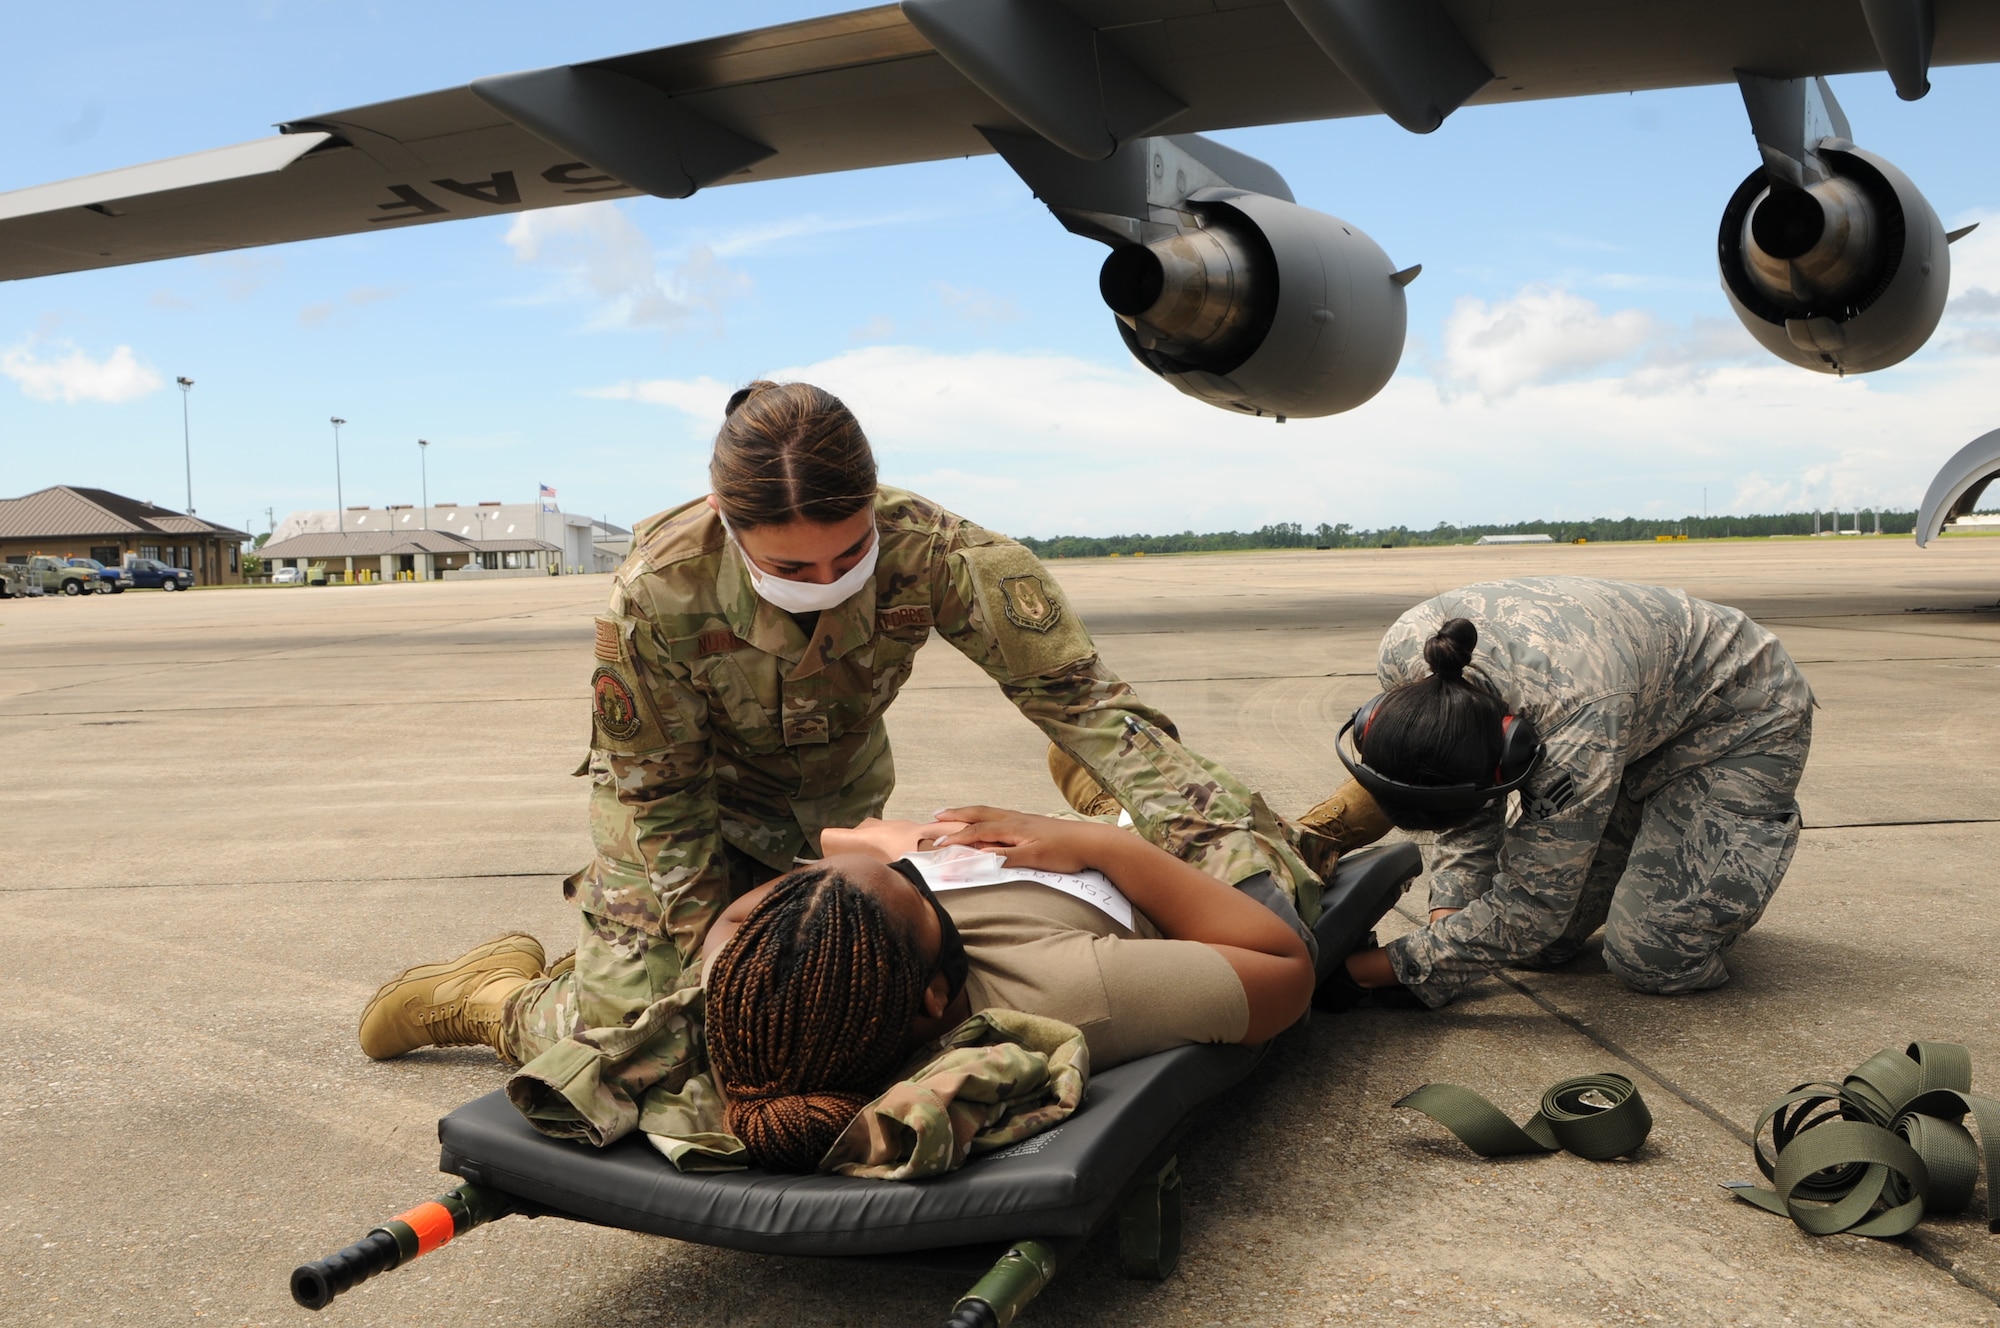 Airmen 1st Class Diana Nunez, a health services management specialists, and Senior Airmen Diana Nguyen, a radio frequency transmission specialist, assigned to the 36th Aeromedical Evacuation Squadron secure a patient to a litter during a training exercise at the Combat Readiness and Training Center in Gulfport, Mississippi, July 20, 2020. The exercise simulated care with both live patients and medical mannequins. (U.S. Air National Guard photo by 2nd Lt. Kiara N. Spann)